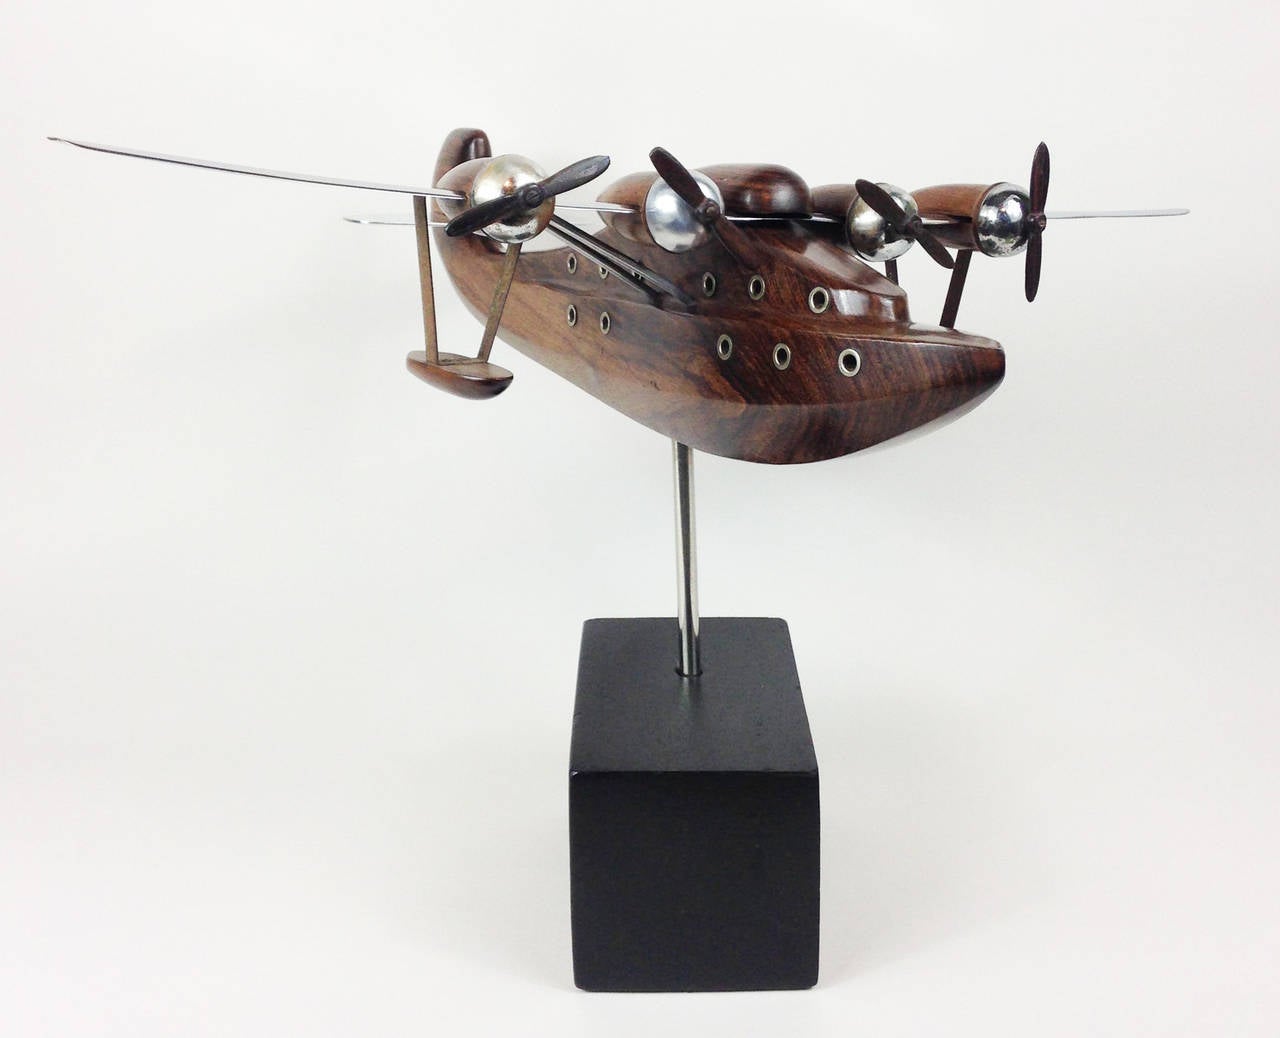 A wonderful desktop model of a flying boat or seaplane. 

Constructed of beautifully carved Indian rosewood with chromed aluminium wings, tail section and engine cowls. Further aluminium details support the underside of the wings, the floats and